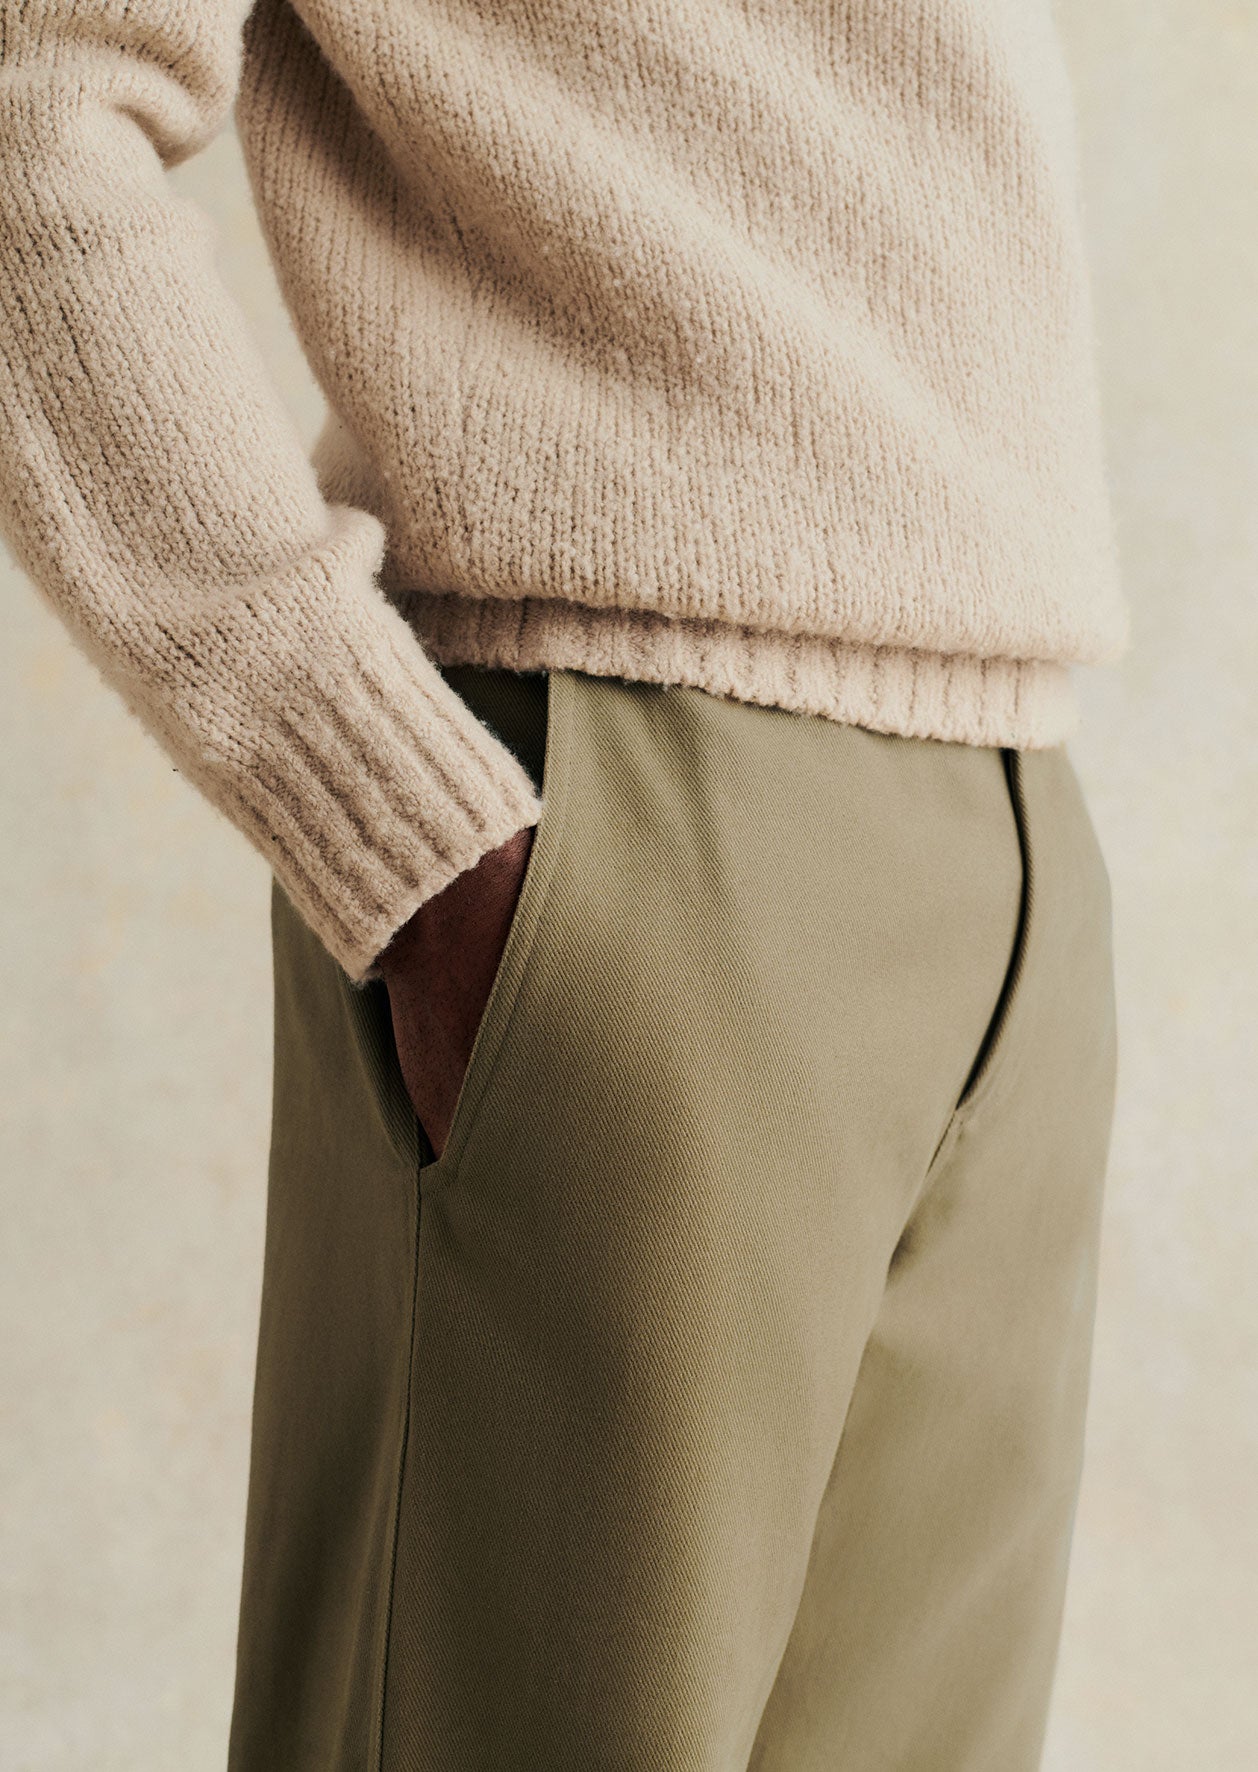 Your Guide to the Men's Trouser